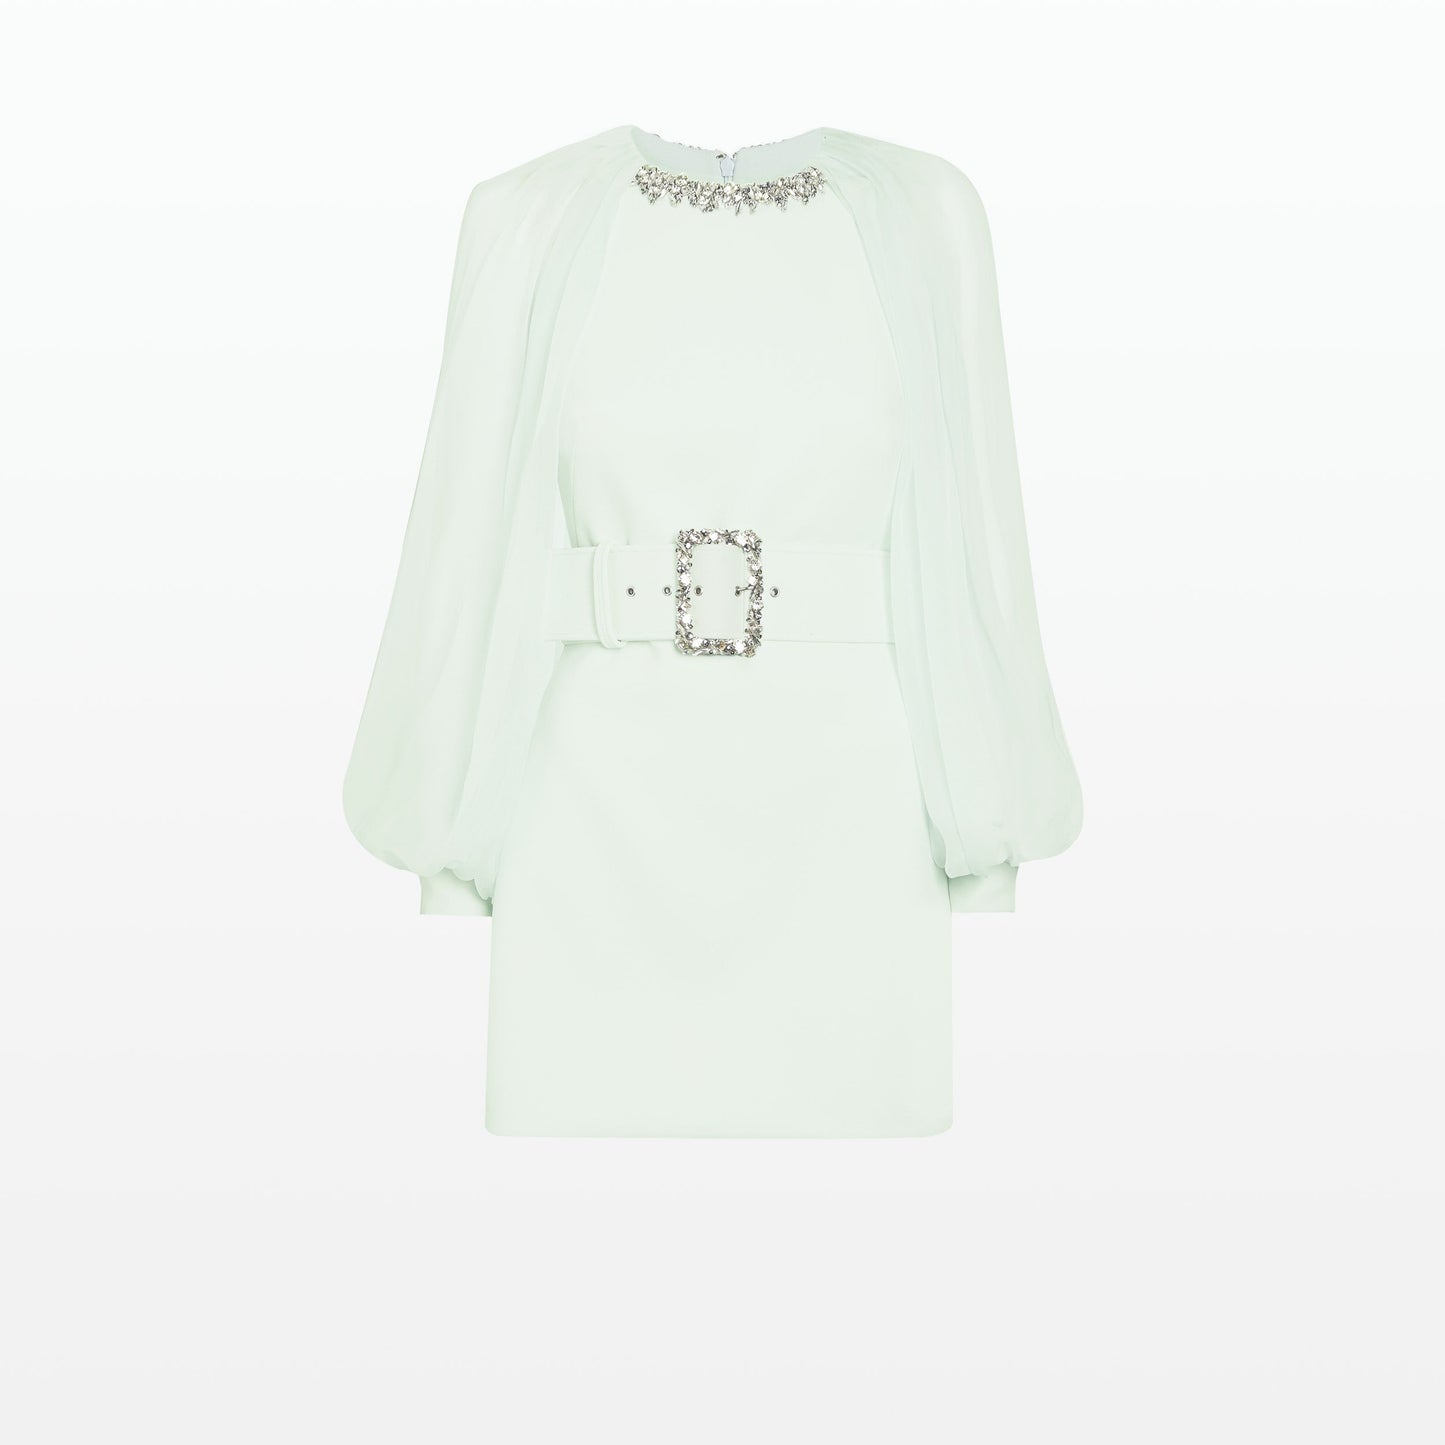 Caoimhe Spearmint Top With Embroidered Belt